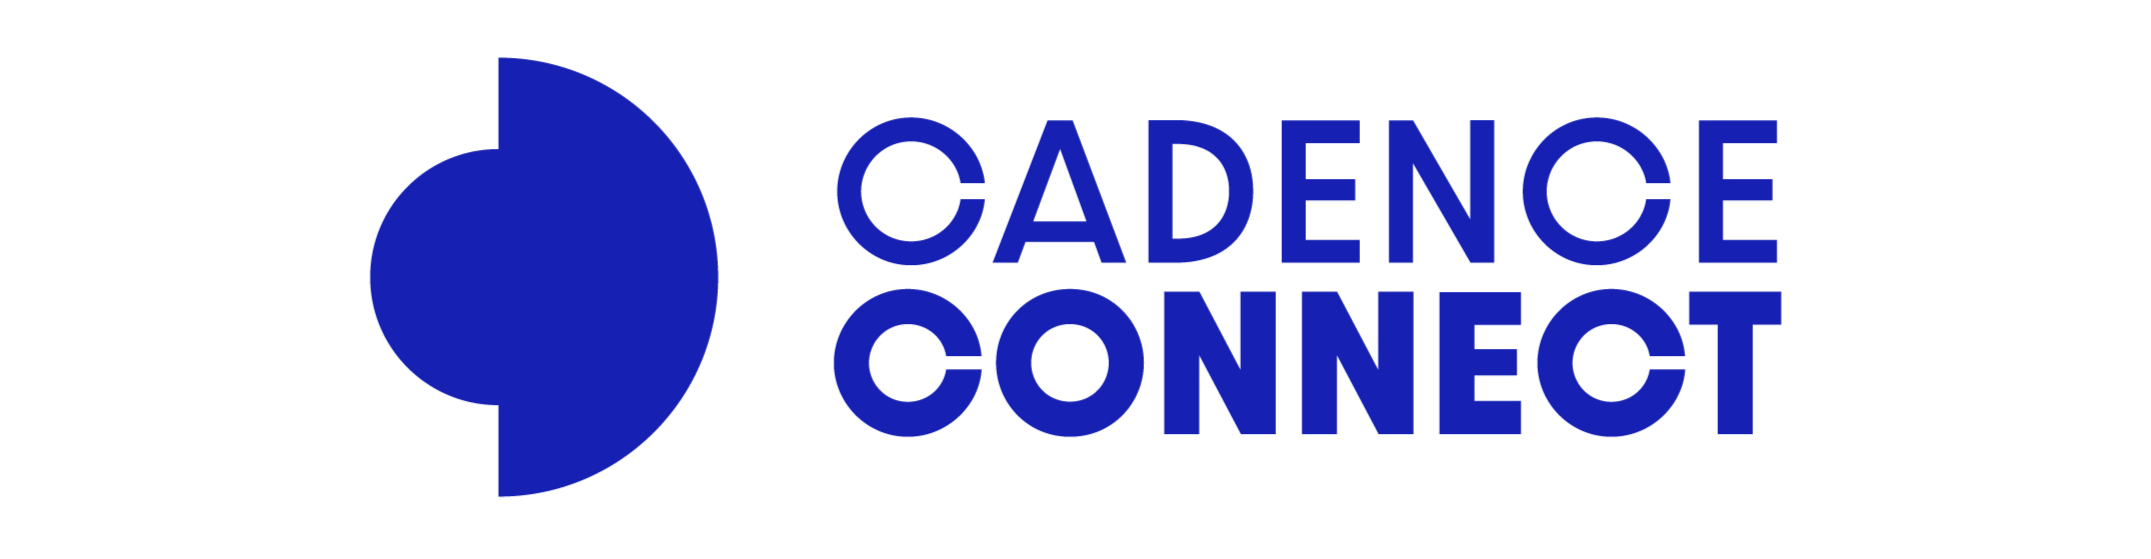 Cadence Connect banner